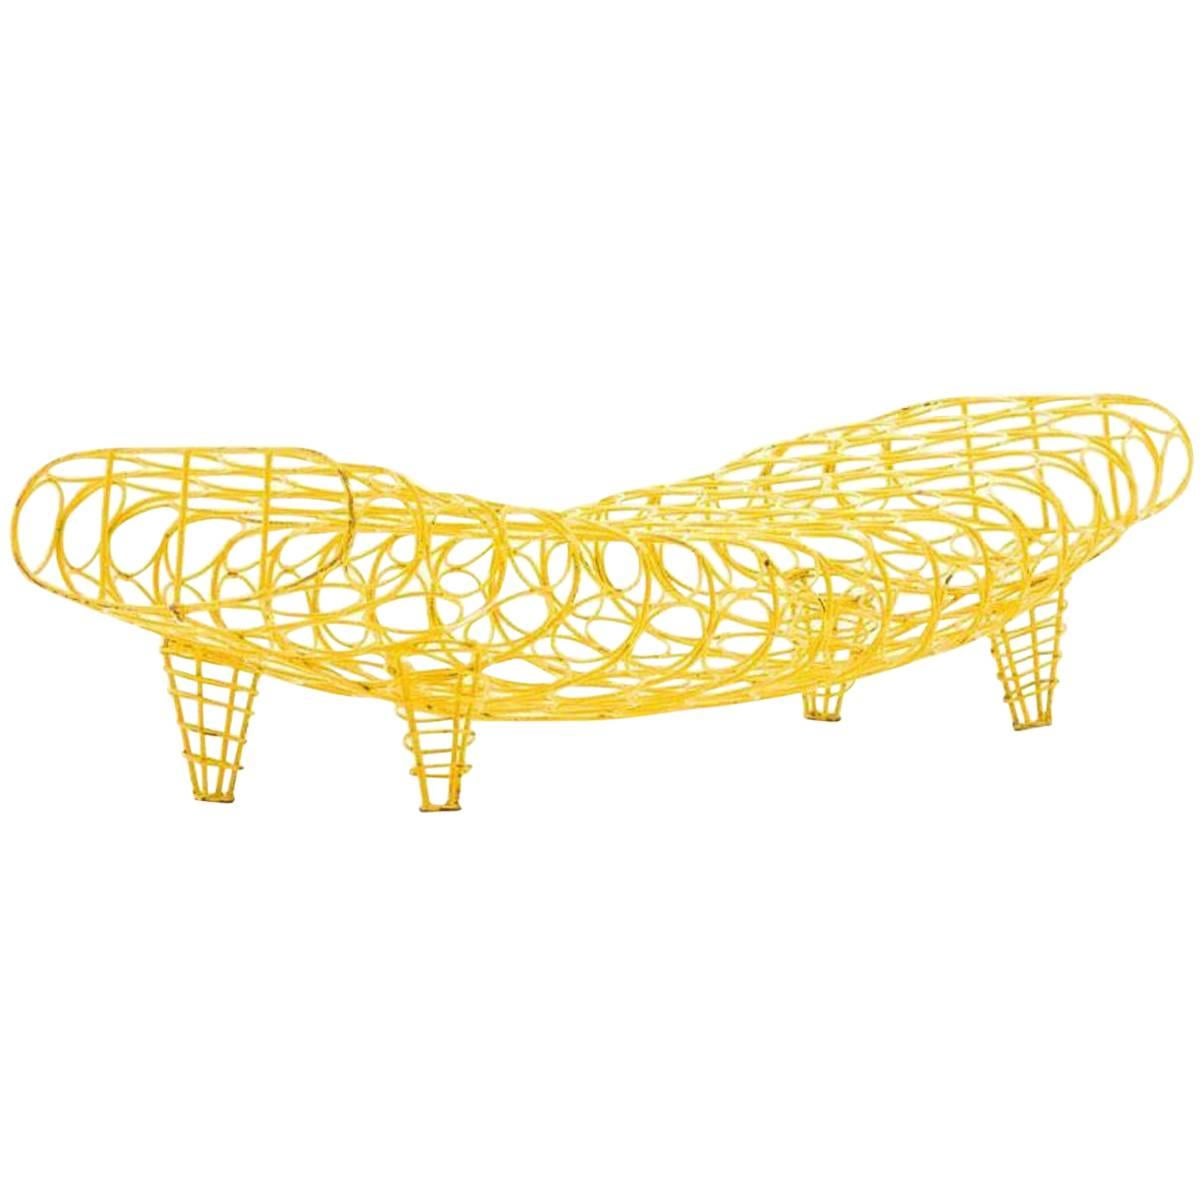 Moroso Gaal Bench or Daybed Suitable for Indoor and Outdoor Use For Sale